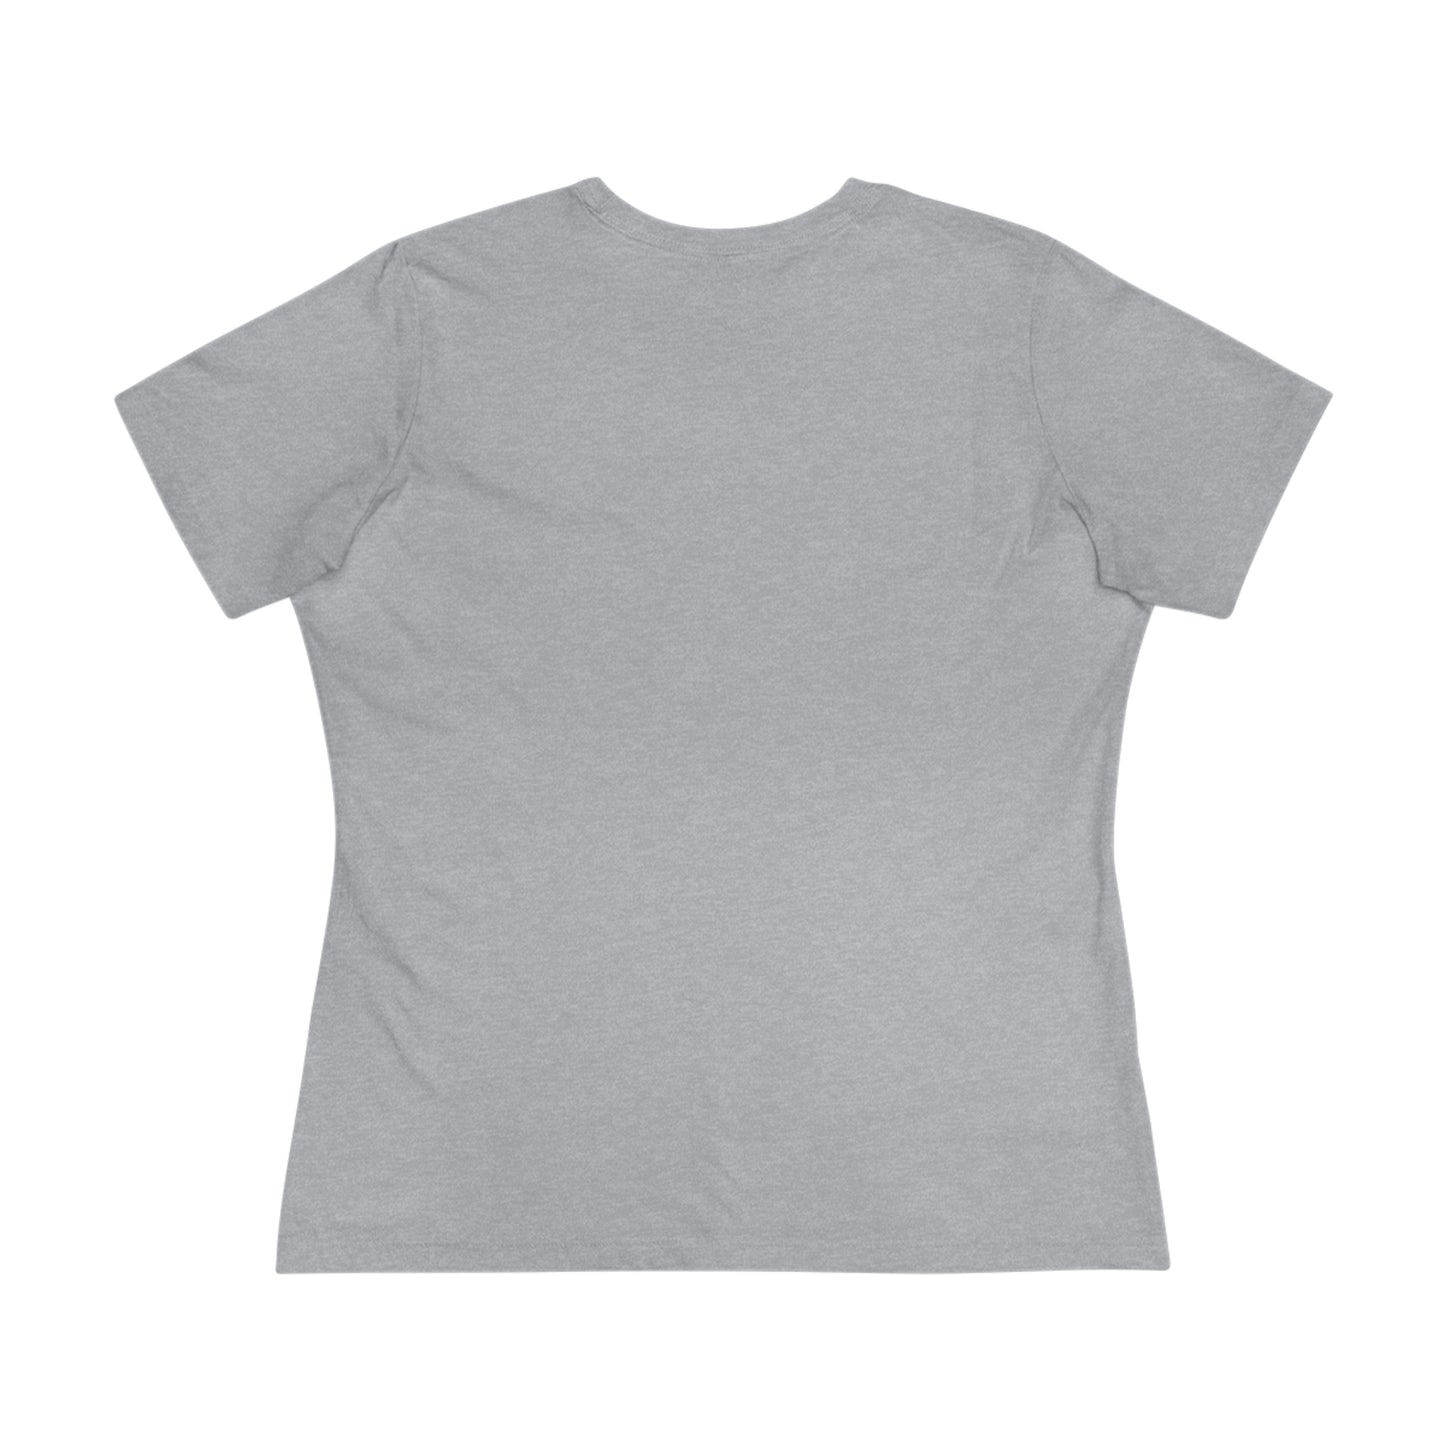 Flat back view of the grey t-shirt